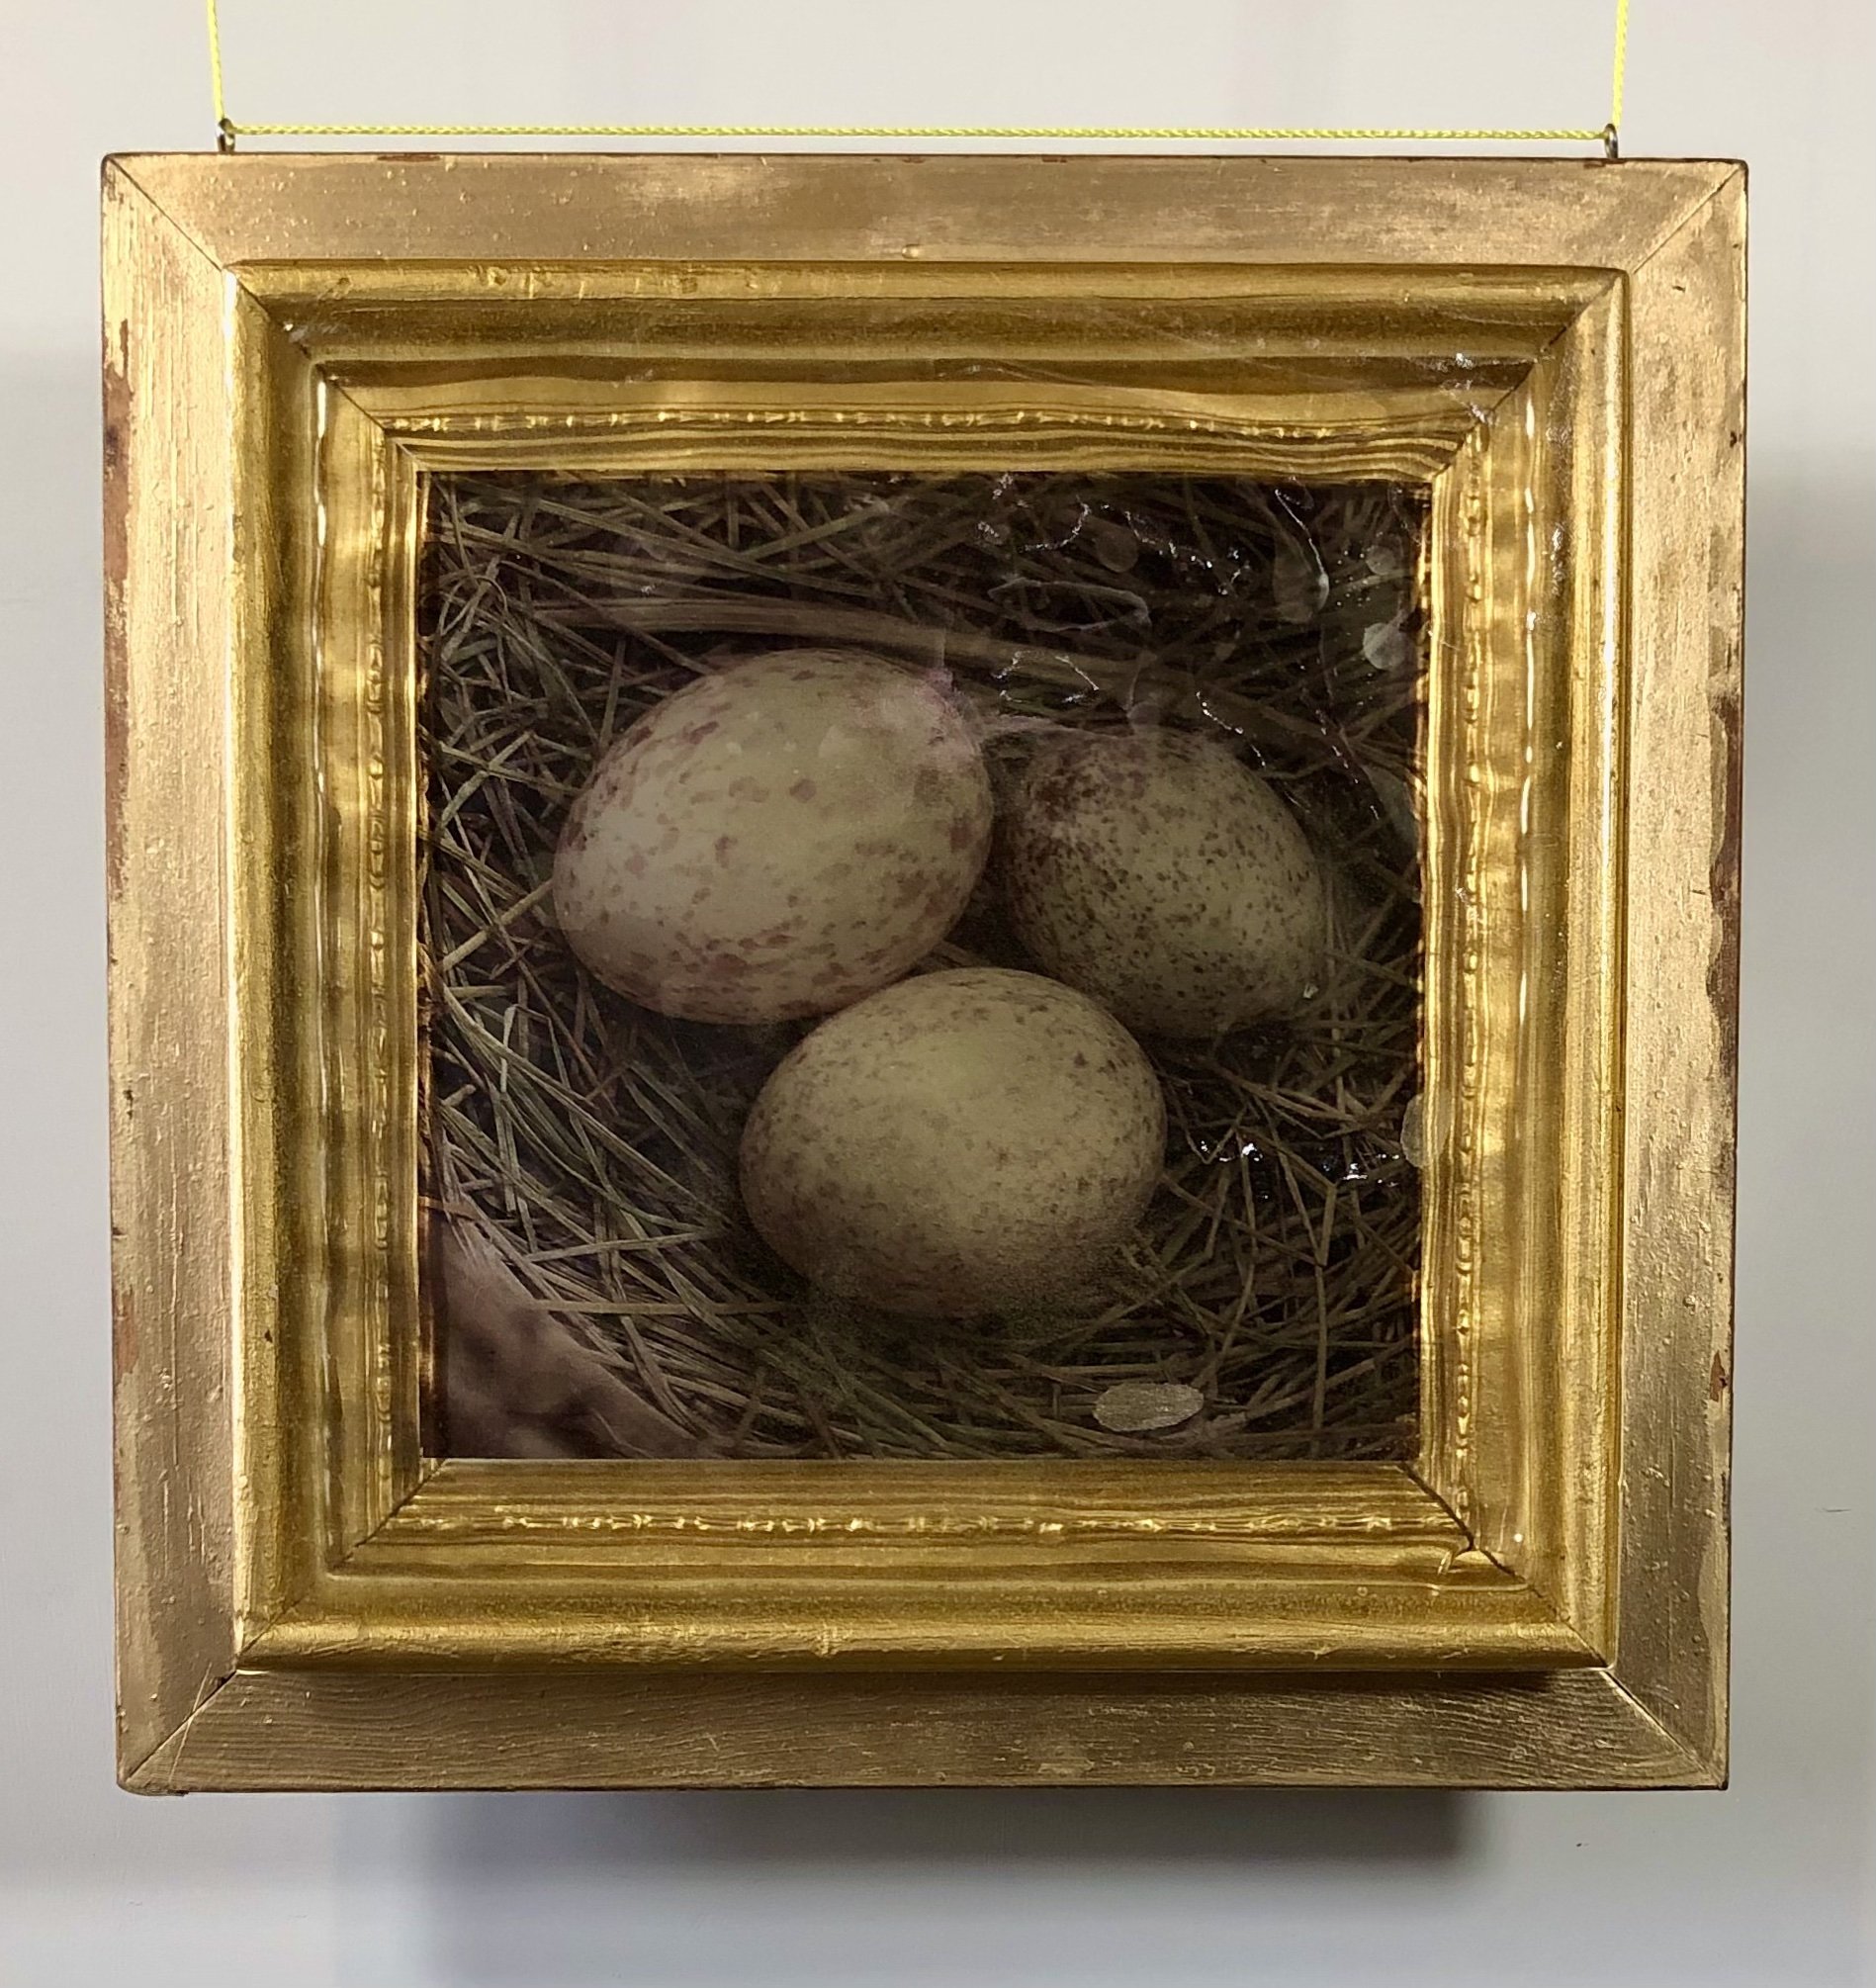   very year Bird Nests were built in the wisteria vines. Every year another bird snuck its eggs in with the little ones. I wanted to toss out the aggressors, but I never did. I used to know the names of the birds, but I can't remember today. I am str